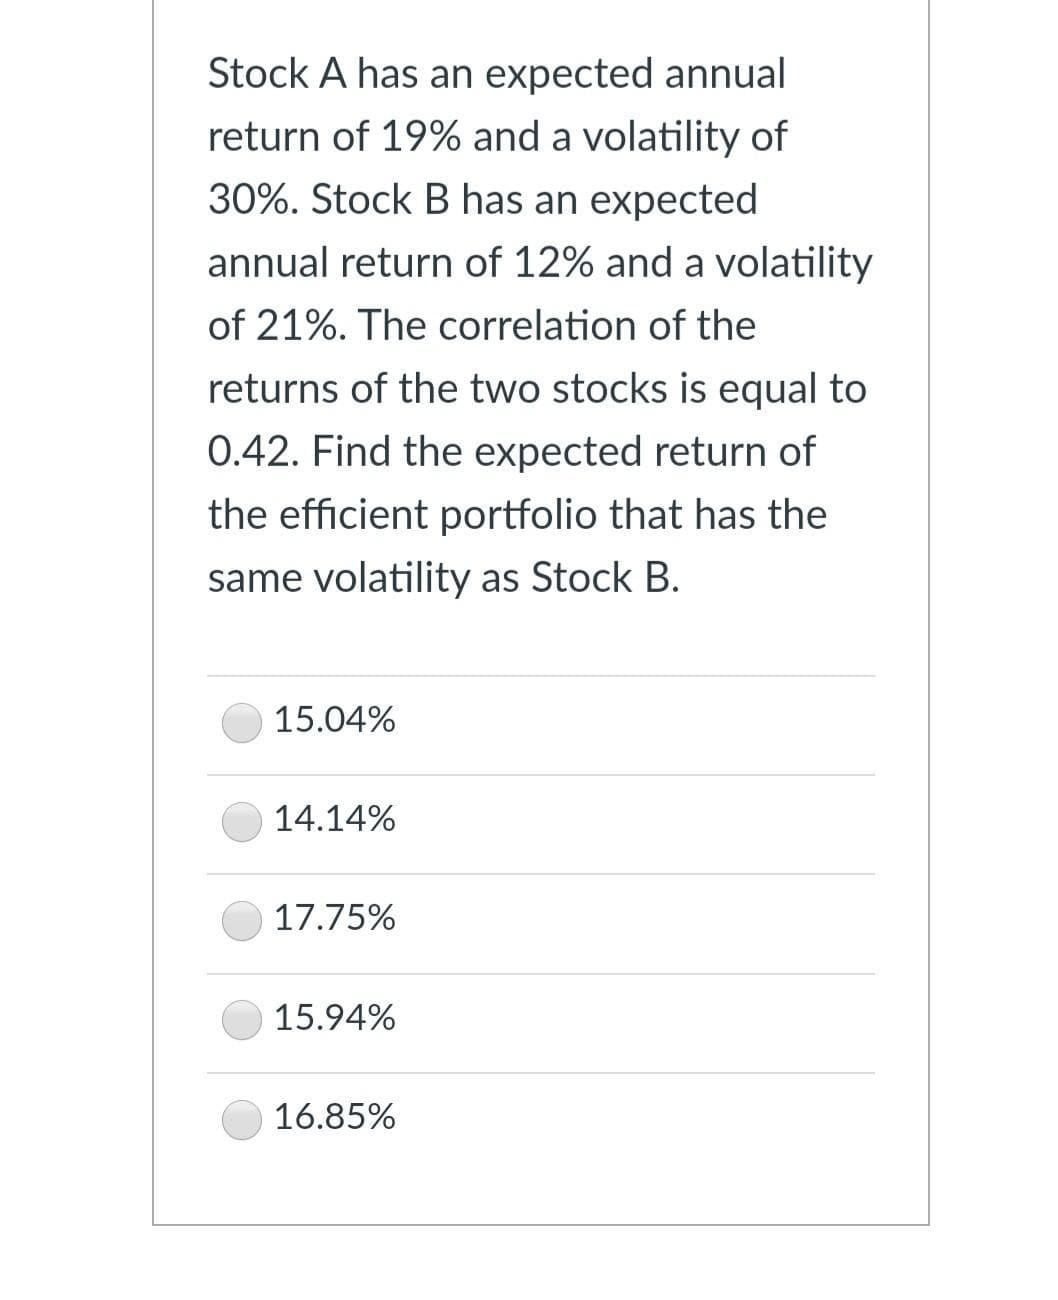 Stock A has an expected annual
return of 19% and a volatility of
30%. Stock B has an expected
annual return of 12% and a volatility
of 21%. The correlation of the
returns of the two stocks is equal to
0.42. Find the expected return of
the efficient portfolio that has the
same volatility as Stock B.
15.04%
14.14%
17.75%
15.94%
16.85%
